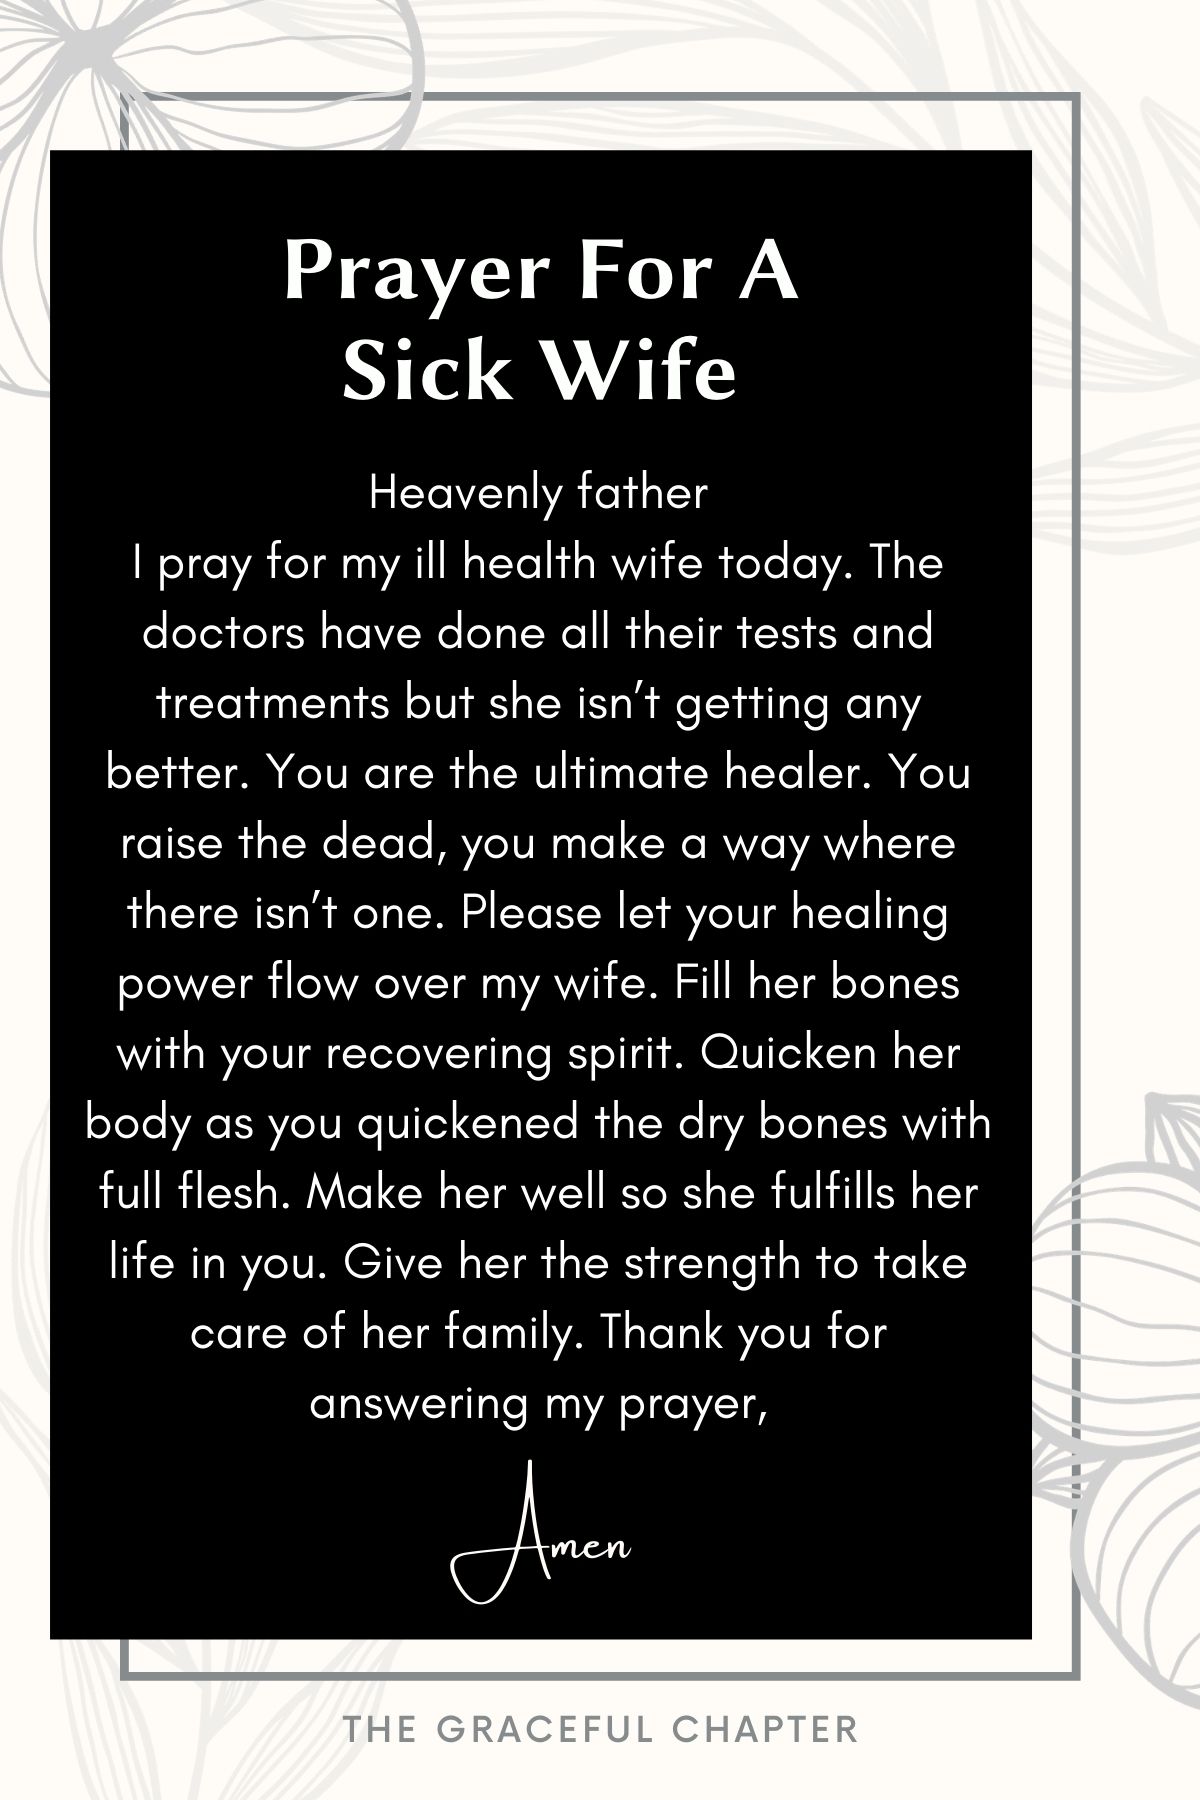 Prayer for a sick wife